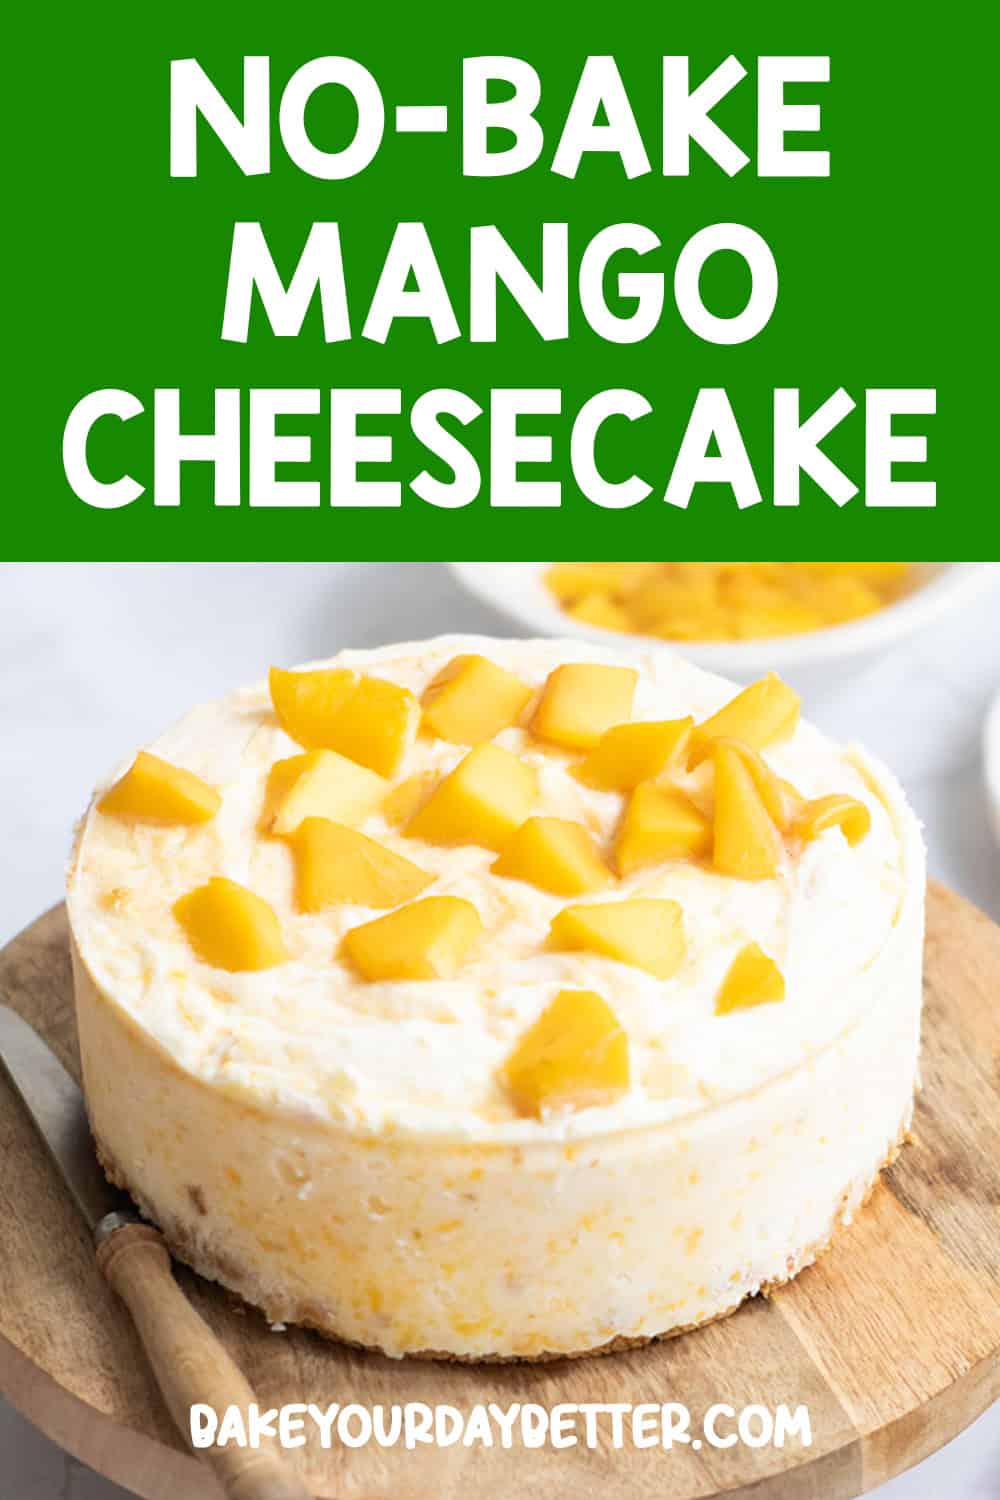 picture of mango cheesecake with text overlay that says: no-bake mango cheesecake